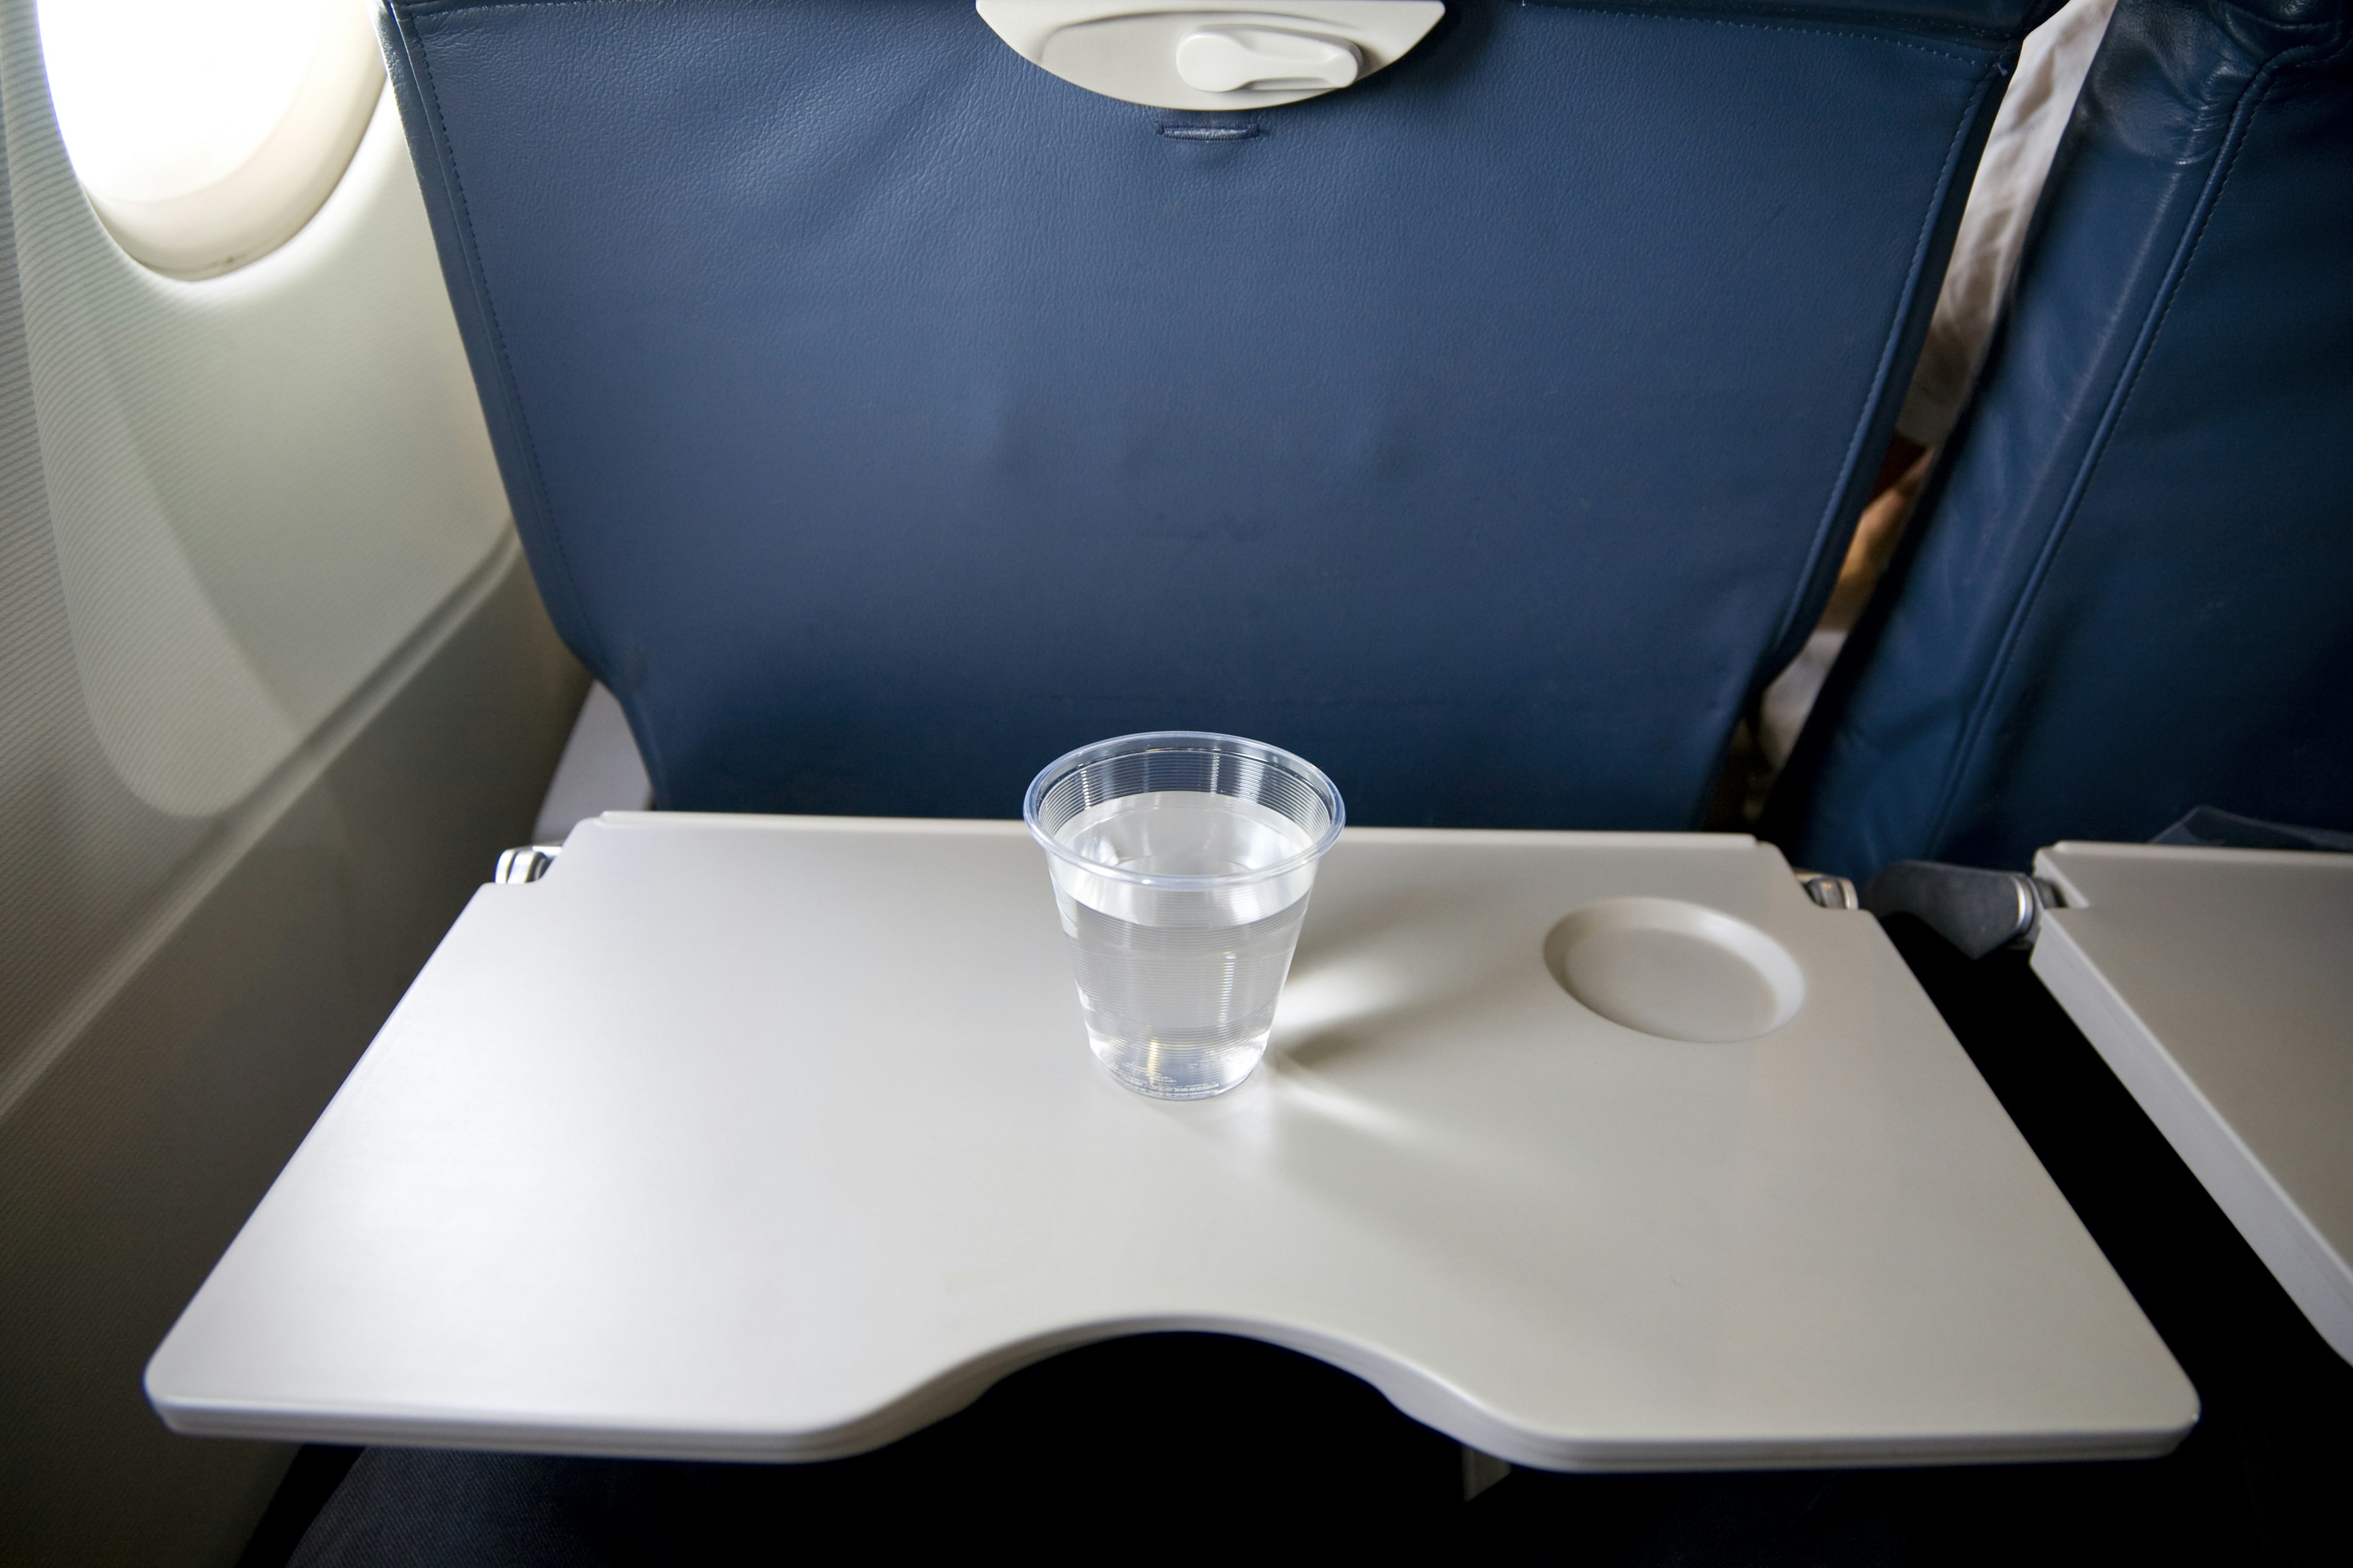 The back of a passenger seat on a commercial airline. The tray table is down, and there is a cup of water sitting on it.